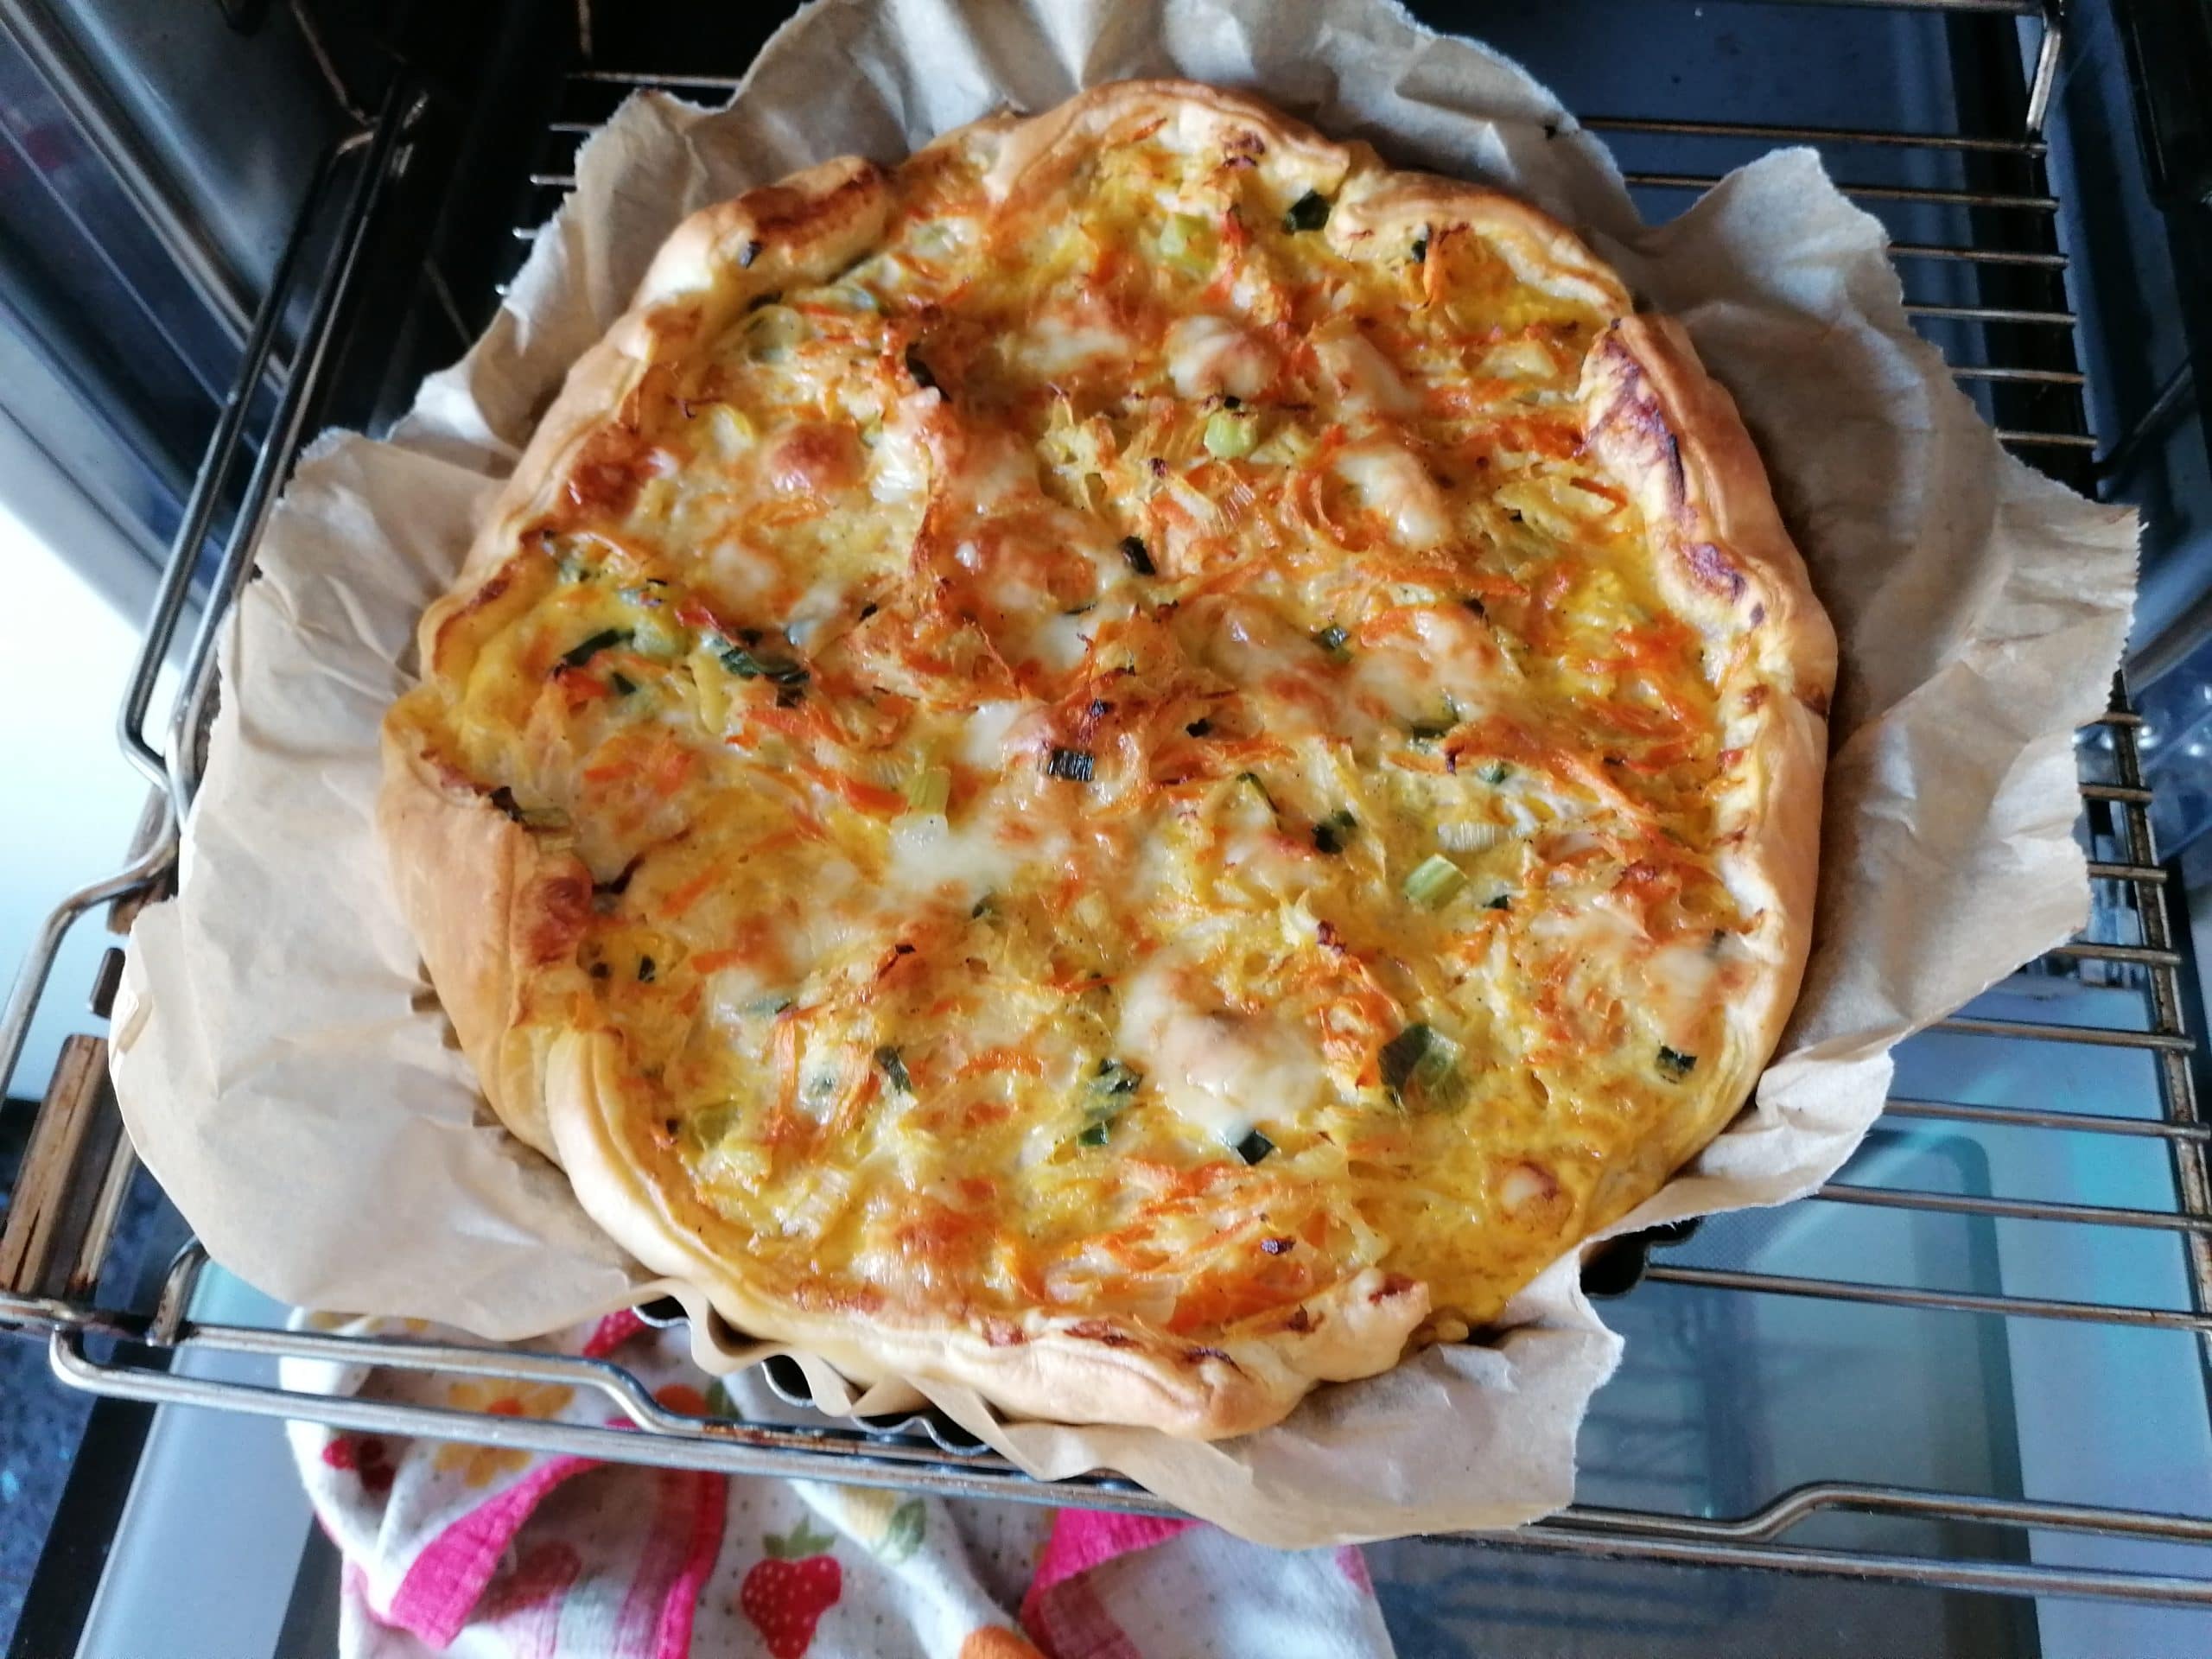 Freshly baked Kohlrabi Quiche, golden-brown and beautifully risen. The buttery, flaky puff pastry crust cradles the creamy and flavorful filling, adorned with specks of grated kohlrabi, carrots, and sliced spring onions. 